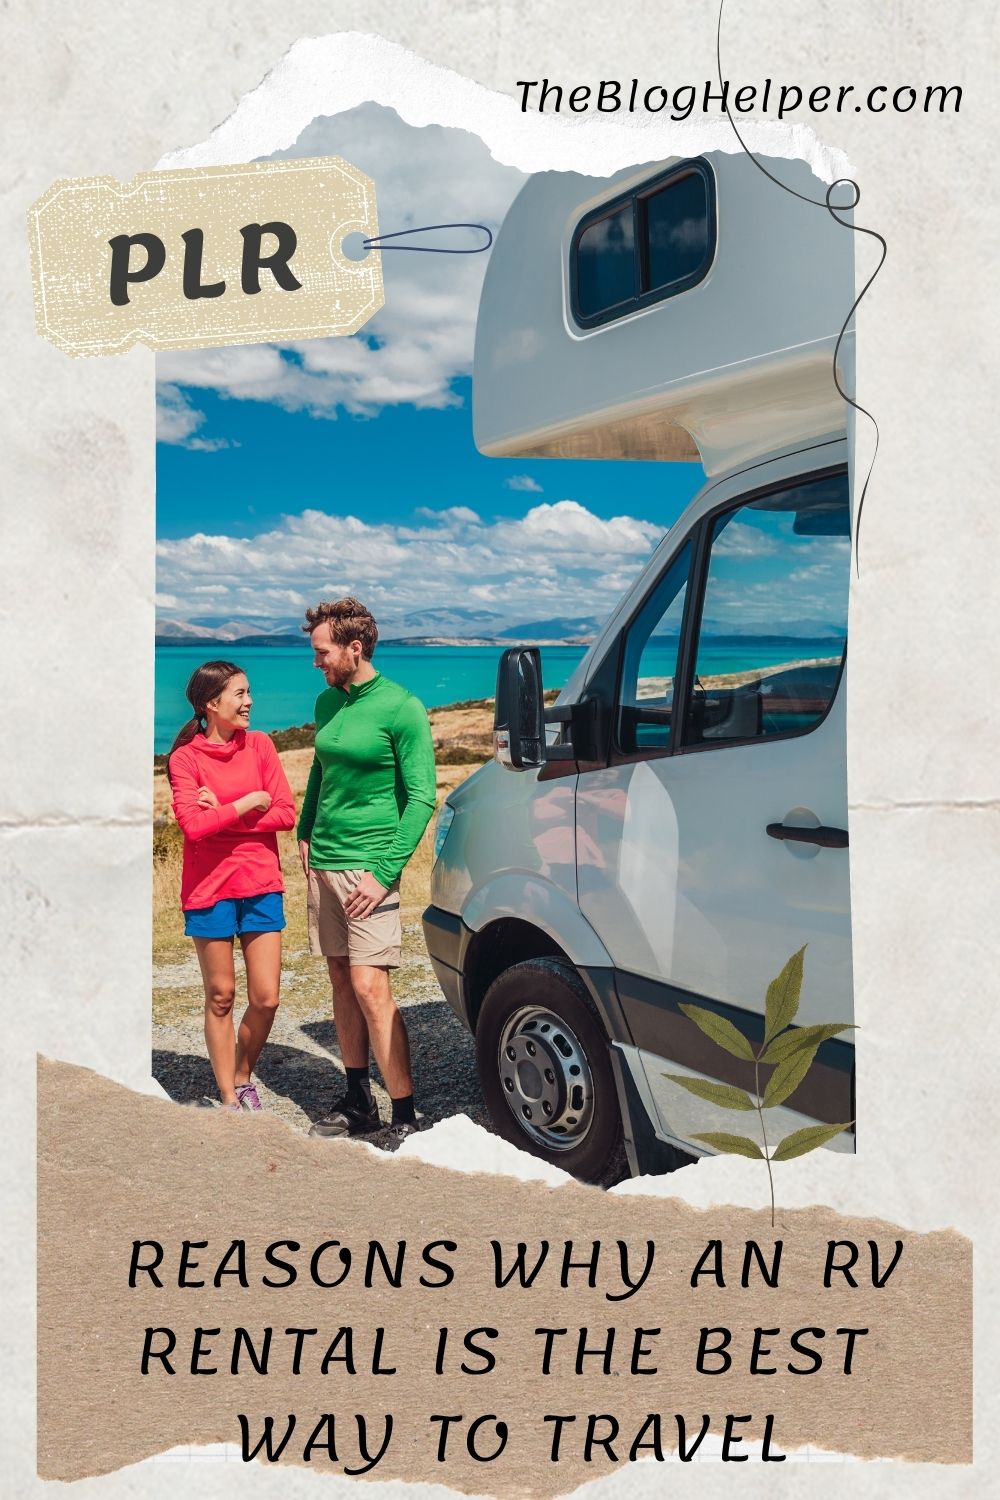 Reasons Why an RV Rental is the Best Way to Travel PLR #plr #rving